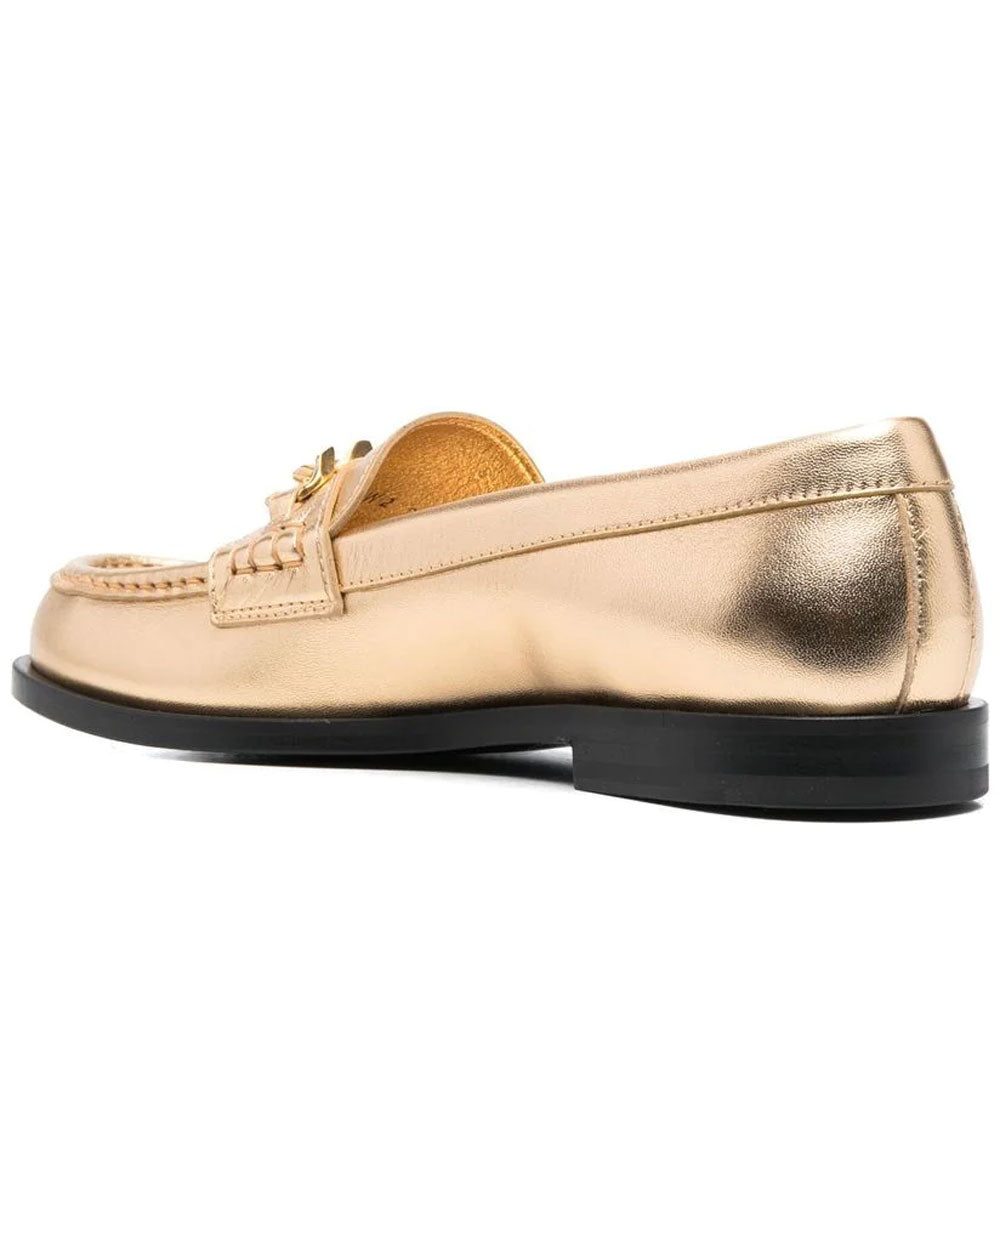 VLOGO Chain Leather Loafer in Antique Brass